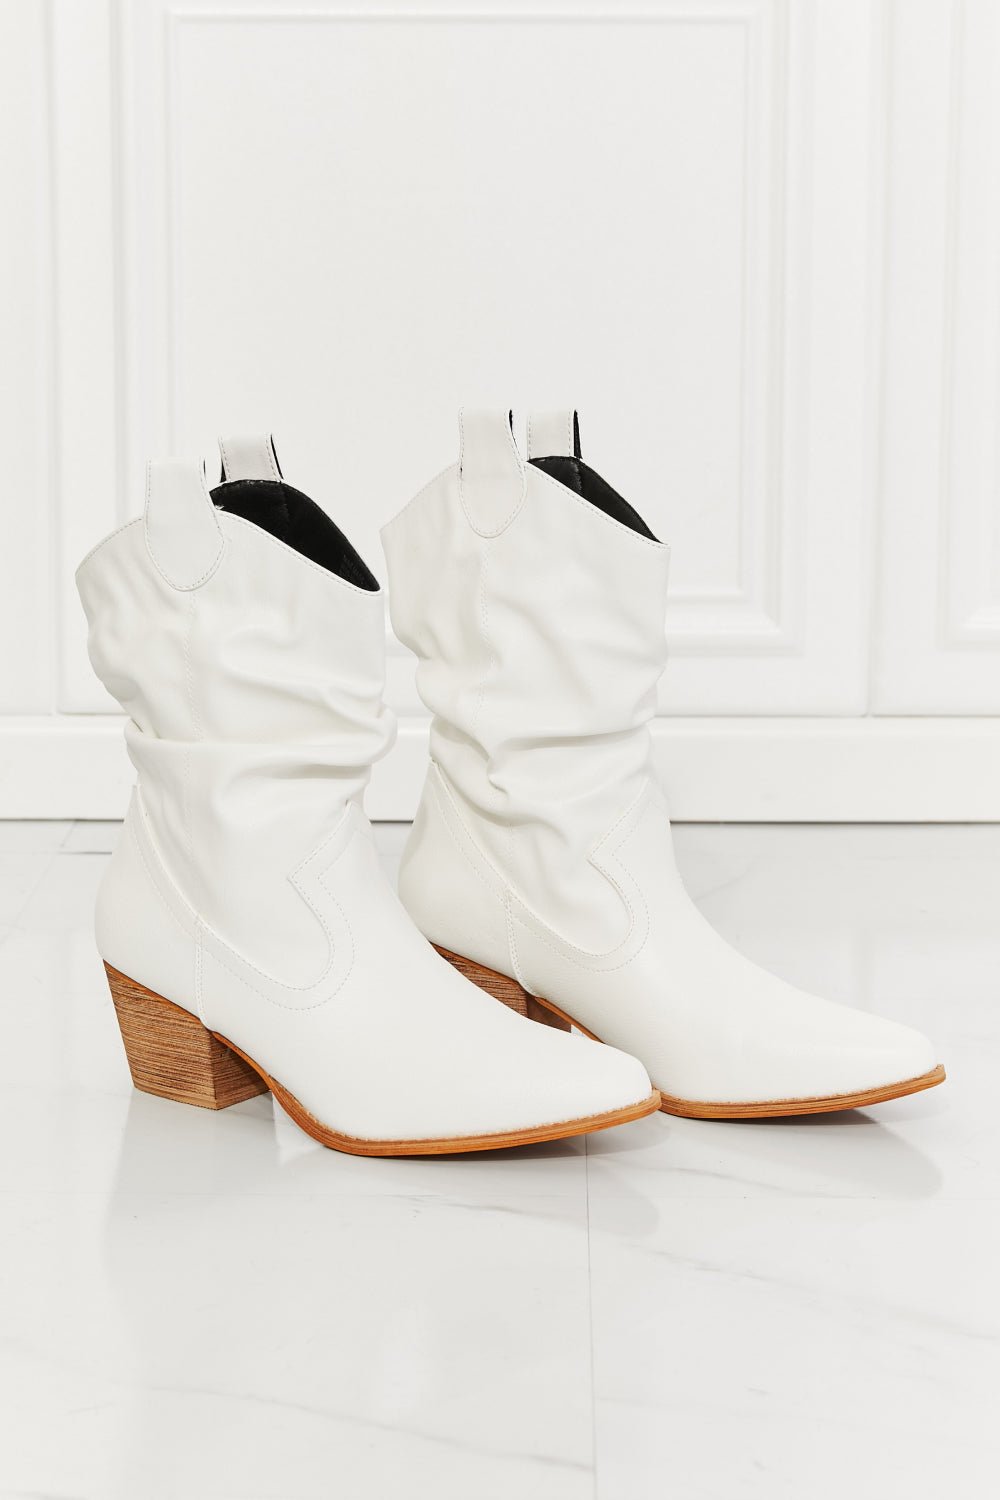 MMShoes Better in Texas Scrunch Cowboy Boots in White - pvmark